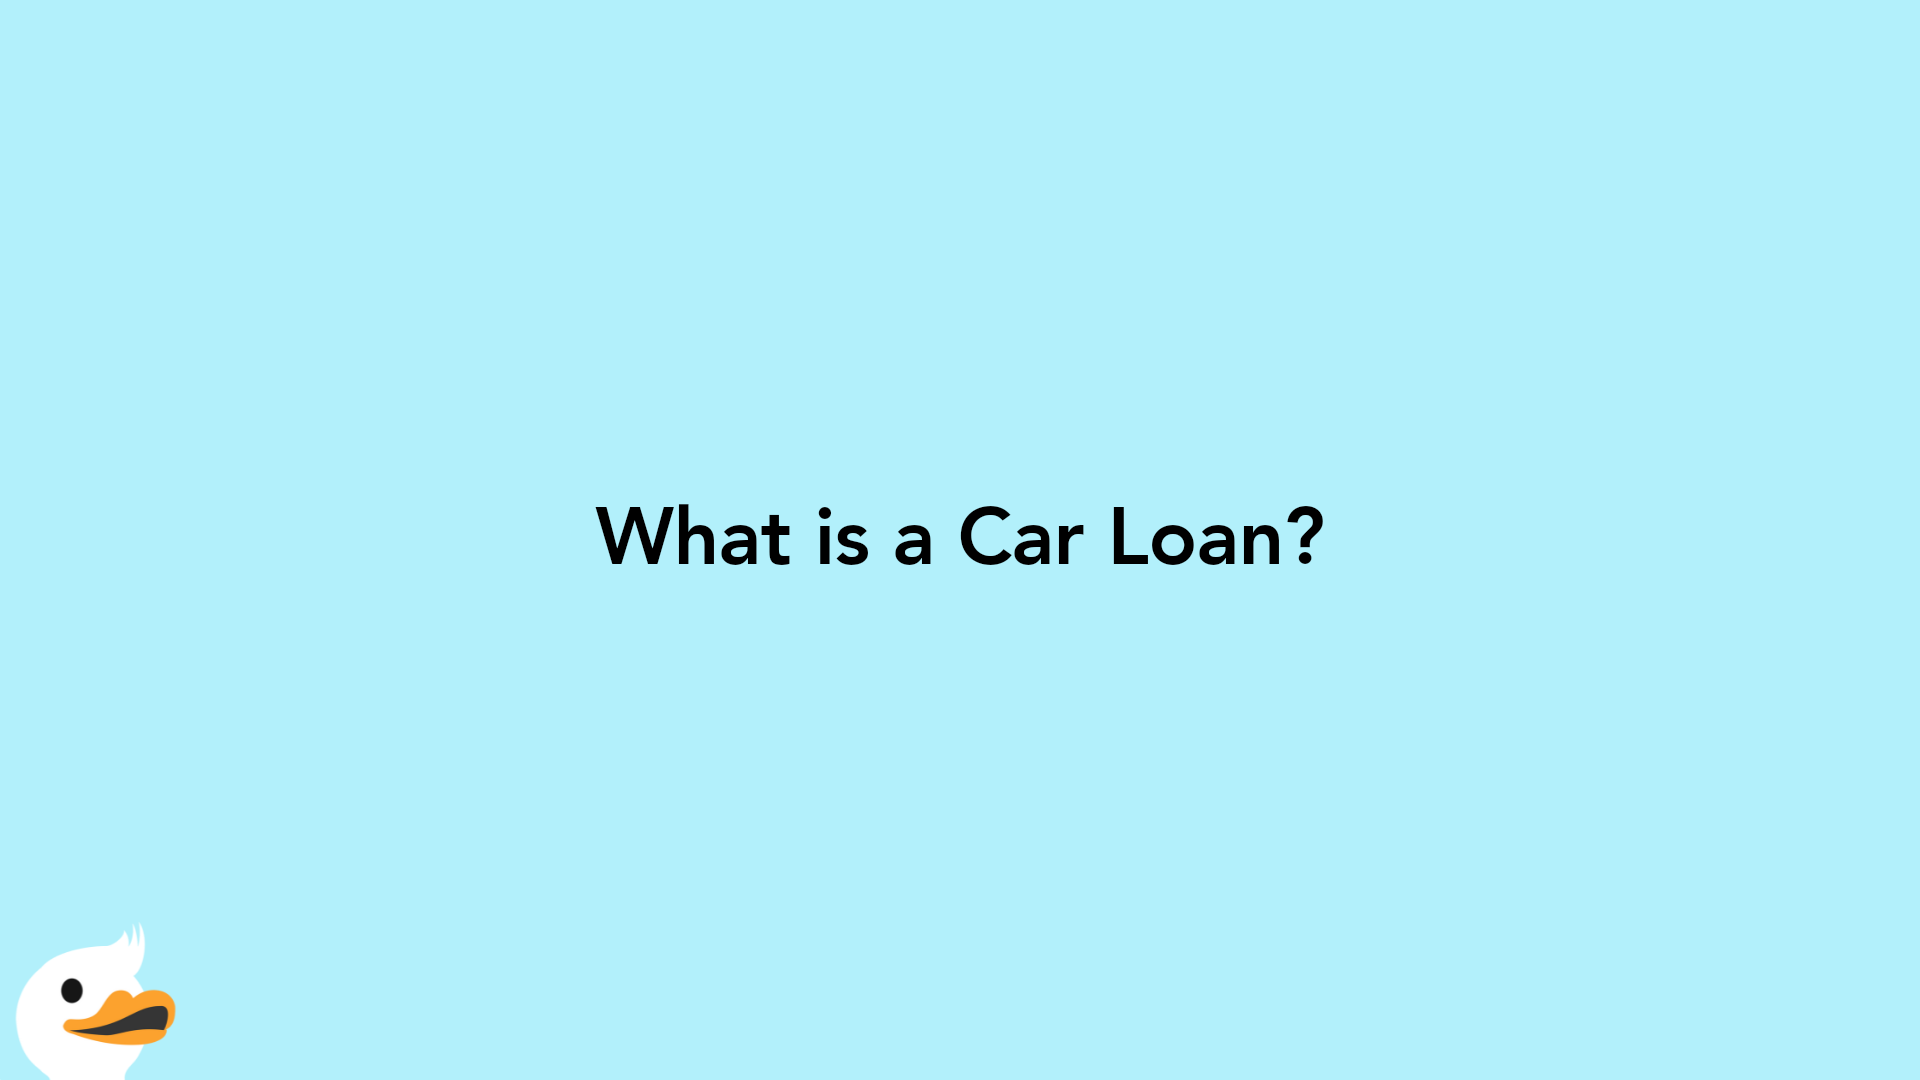 What is a Car Loan?